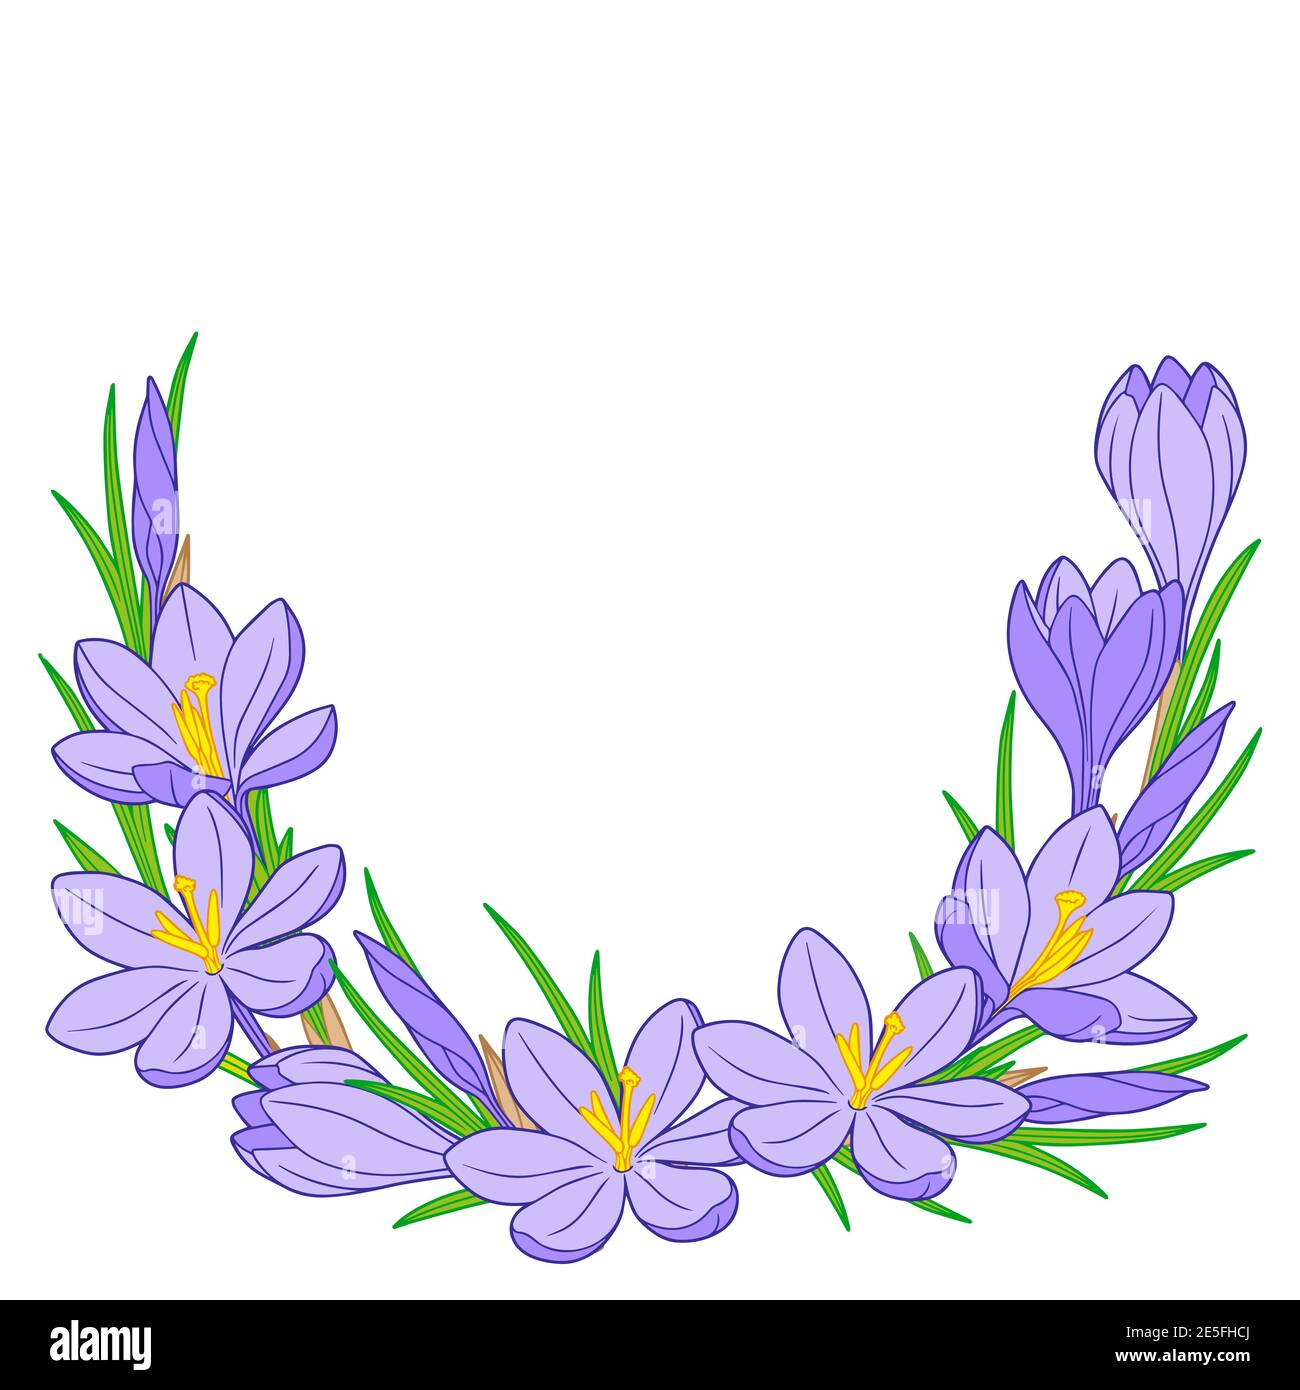 Vector frame with blue crocus flowers on a white background Stock Vector